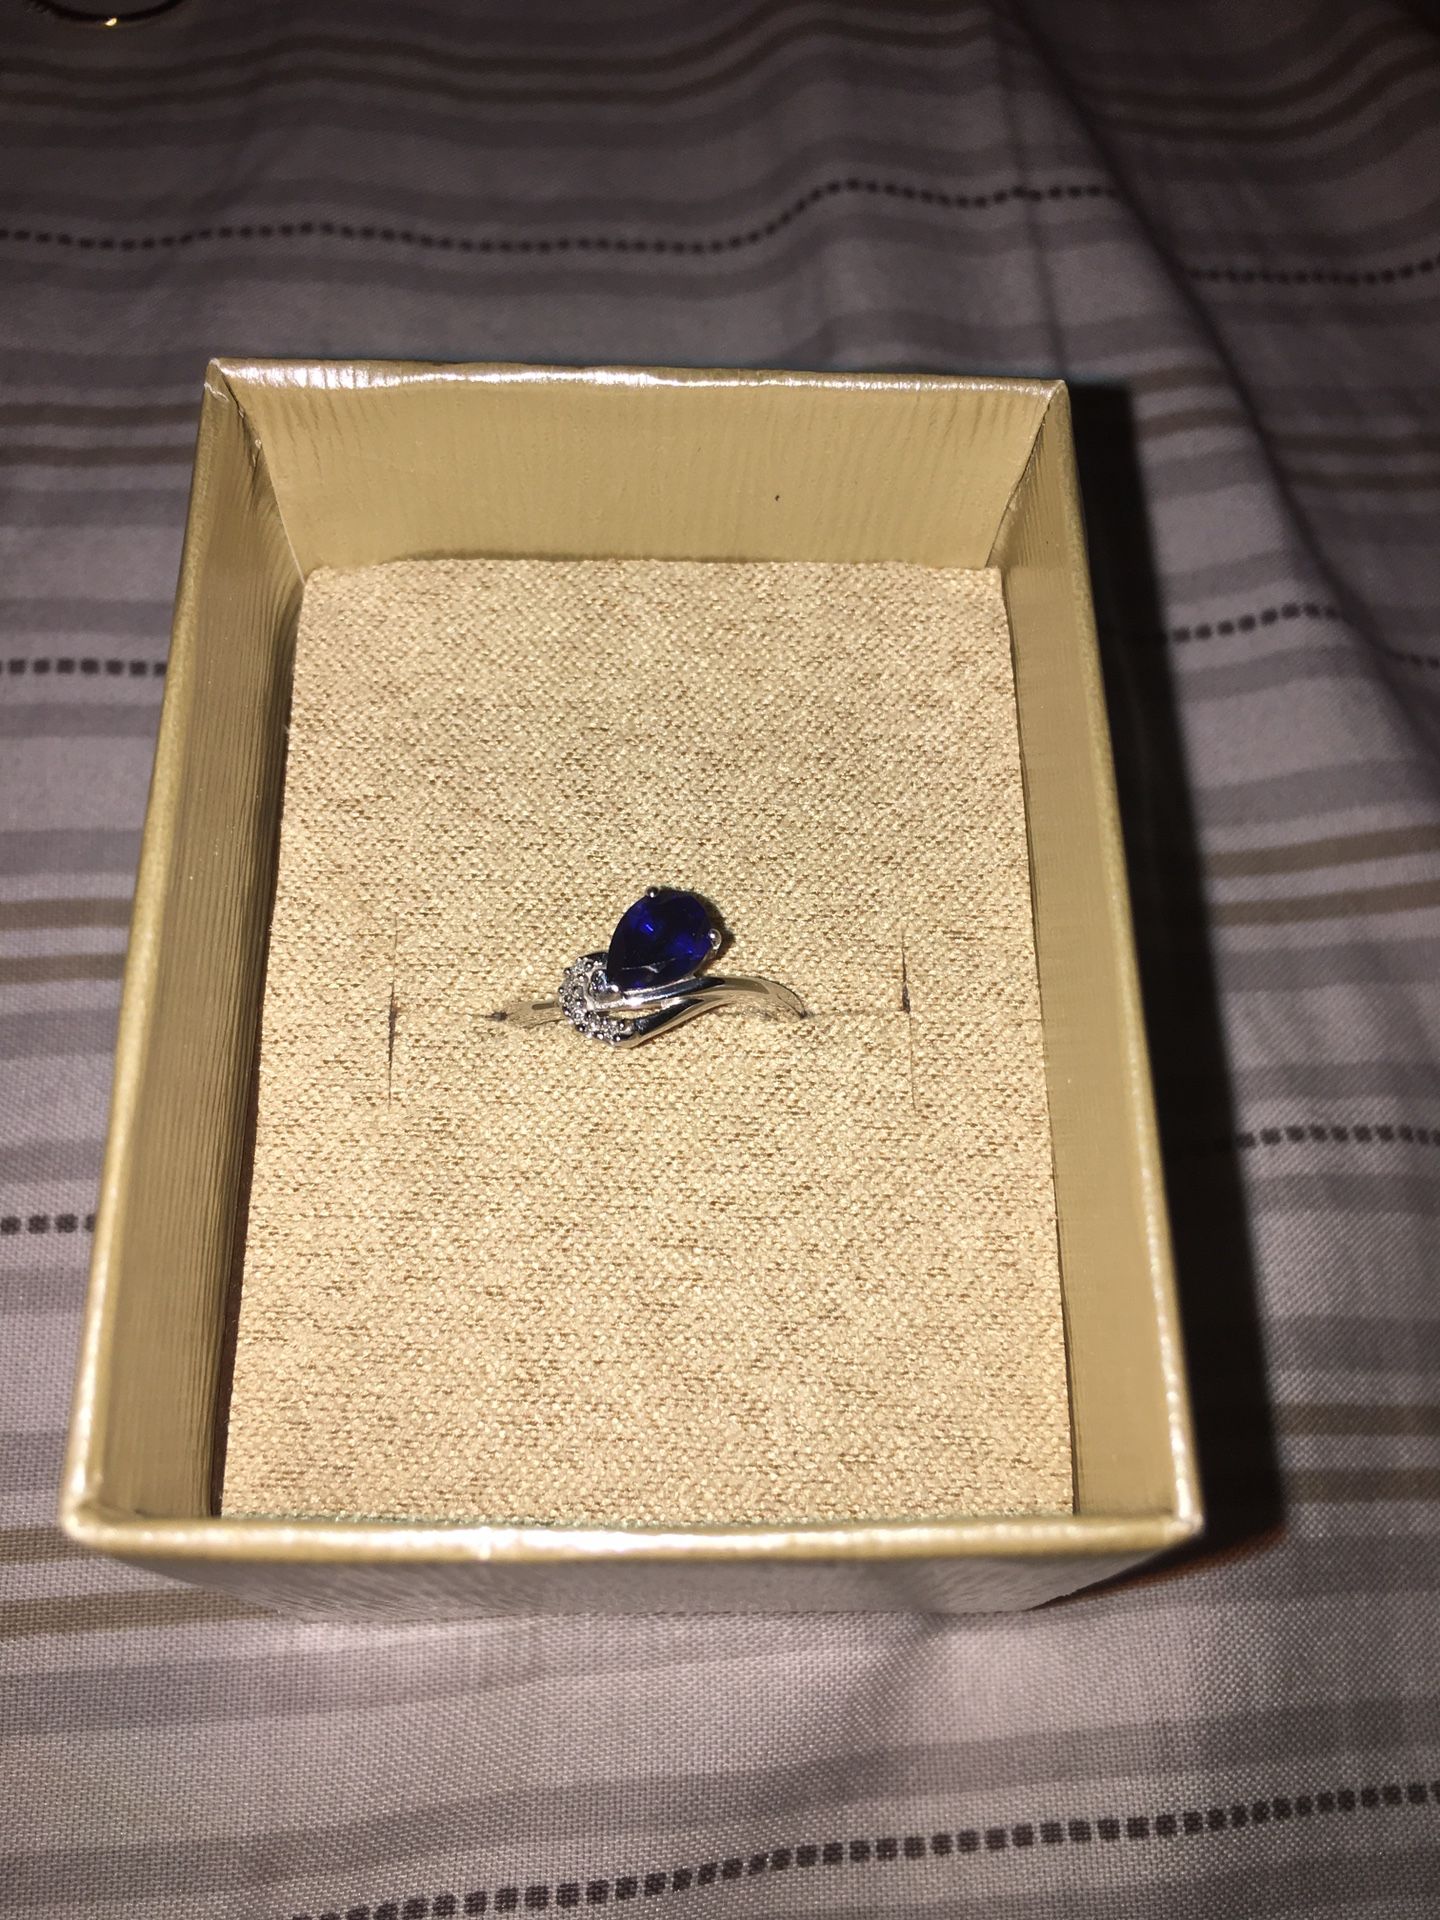 10kt solid gold and sapphire diamond ring 70$ firm